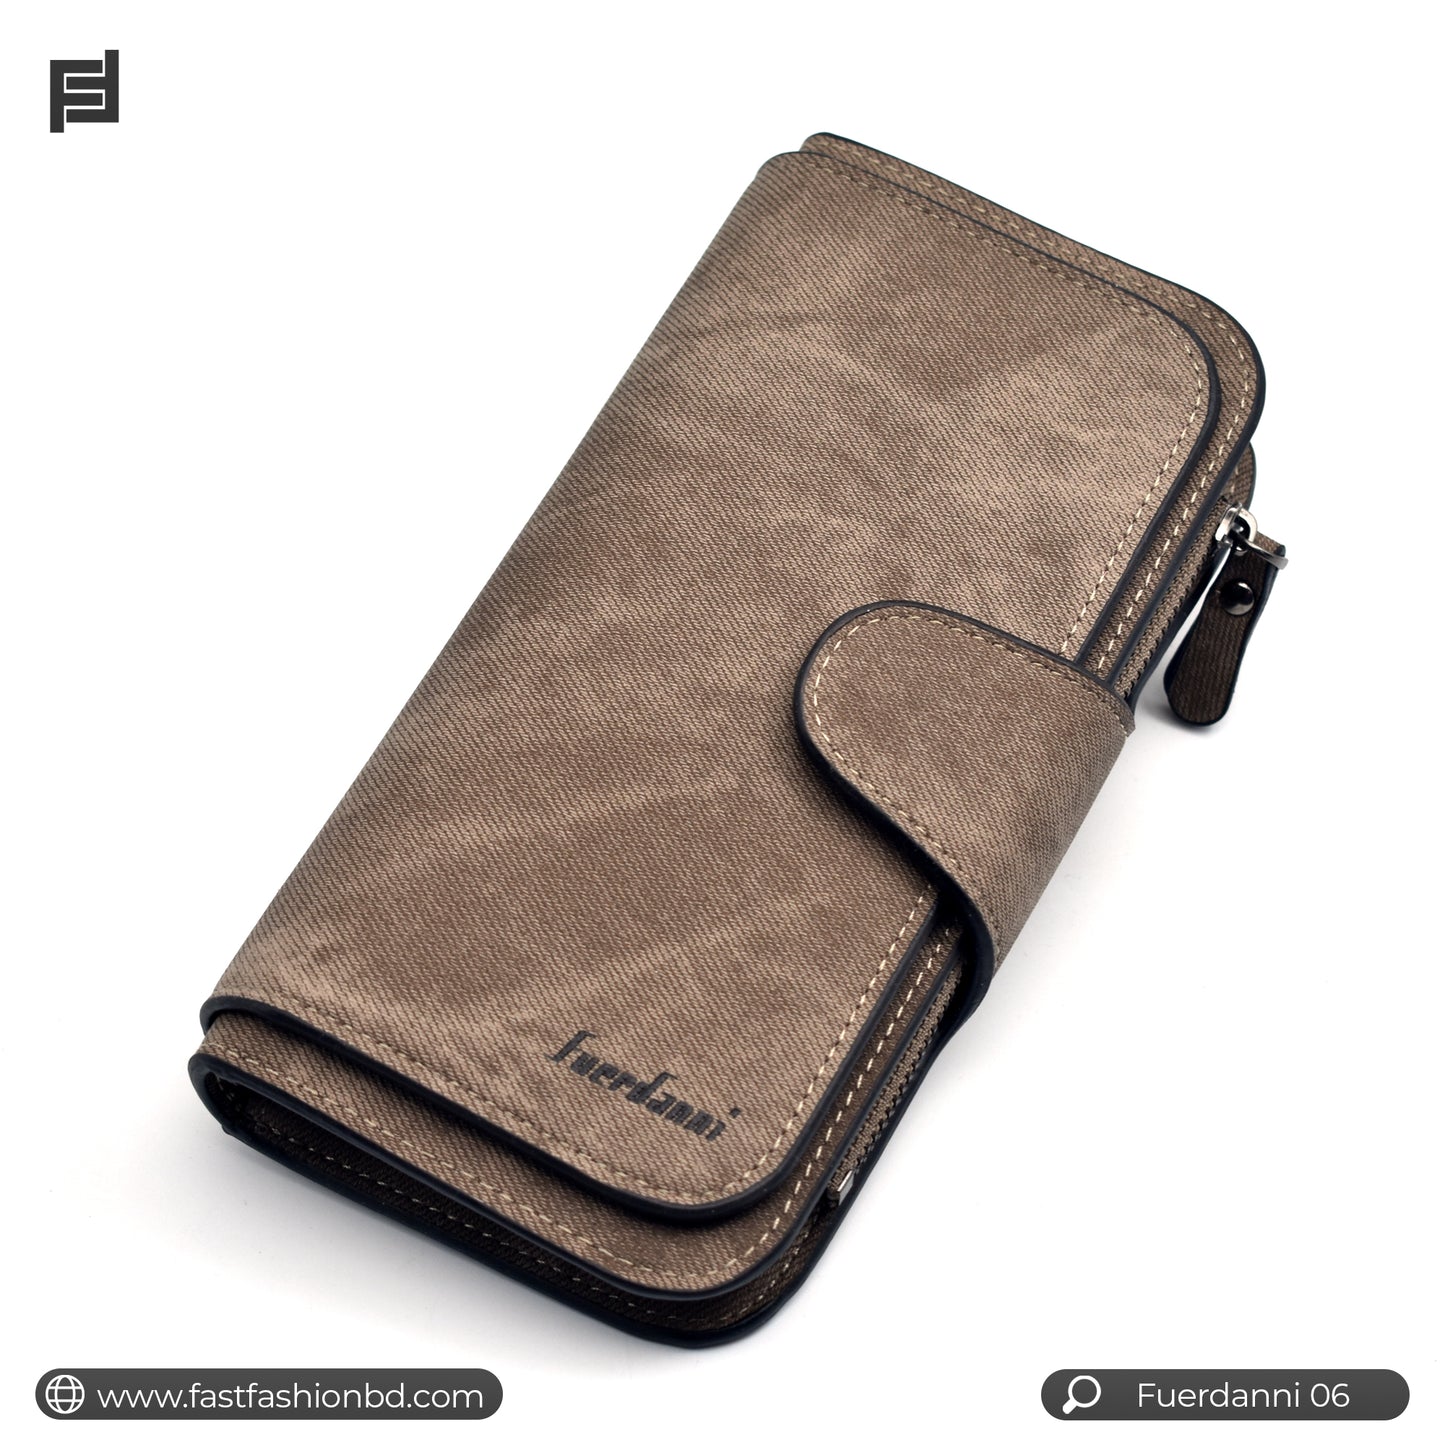 Fuerdanni Long Multi Purpose Wallet Imported from China - Fuerdanni 06